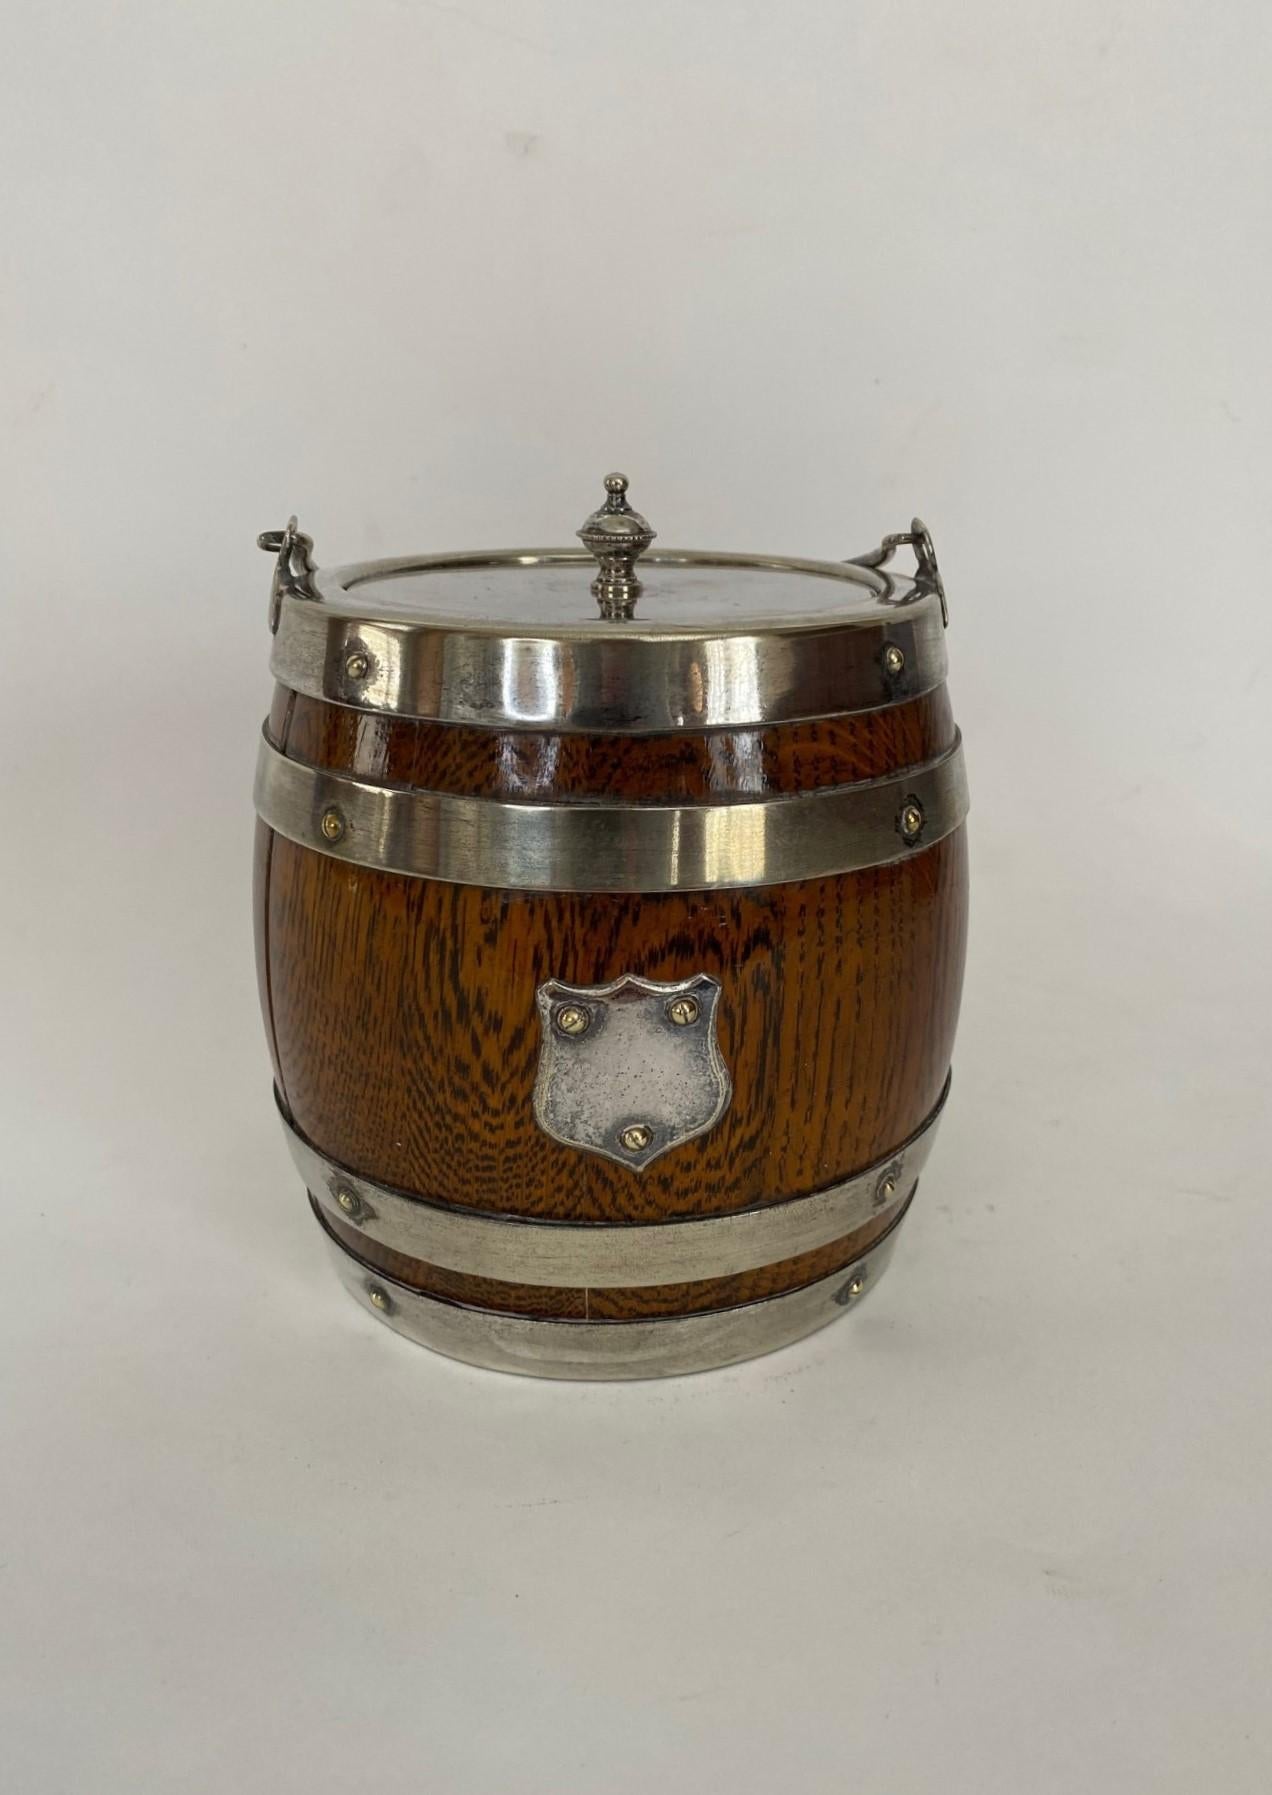 Whatever you fancy...Keep your buns warm or elegantly offer ice on your bar...

This attractive 19th century Victorian English Oak lidded biscuit barrel with a white interior ceramic liner and silver plated handle, top, shield  and bands. . A